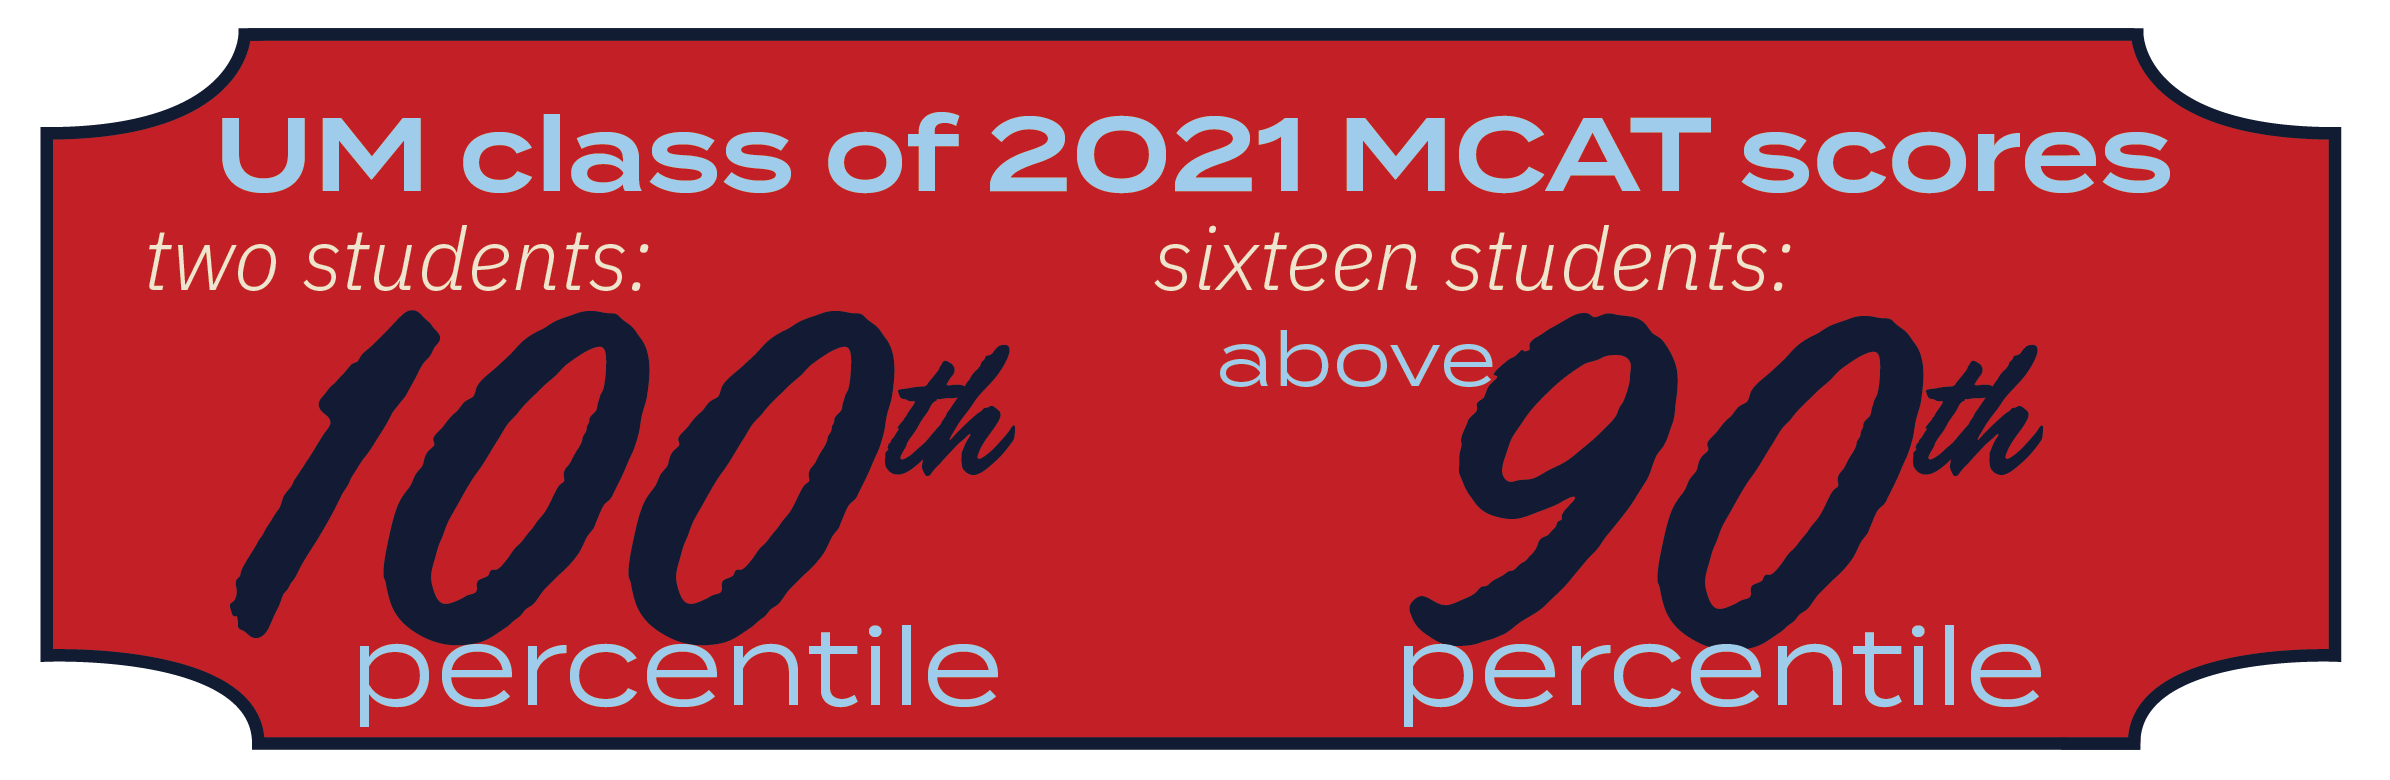 Infographic - UM class of 2021 MCAT scores - Two students: 100th percentile, Sixteen students: above 90th percentile